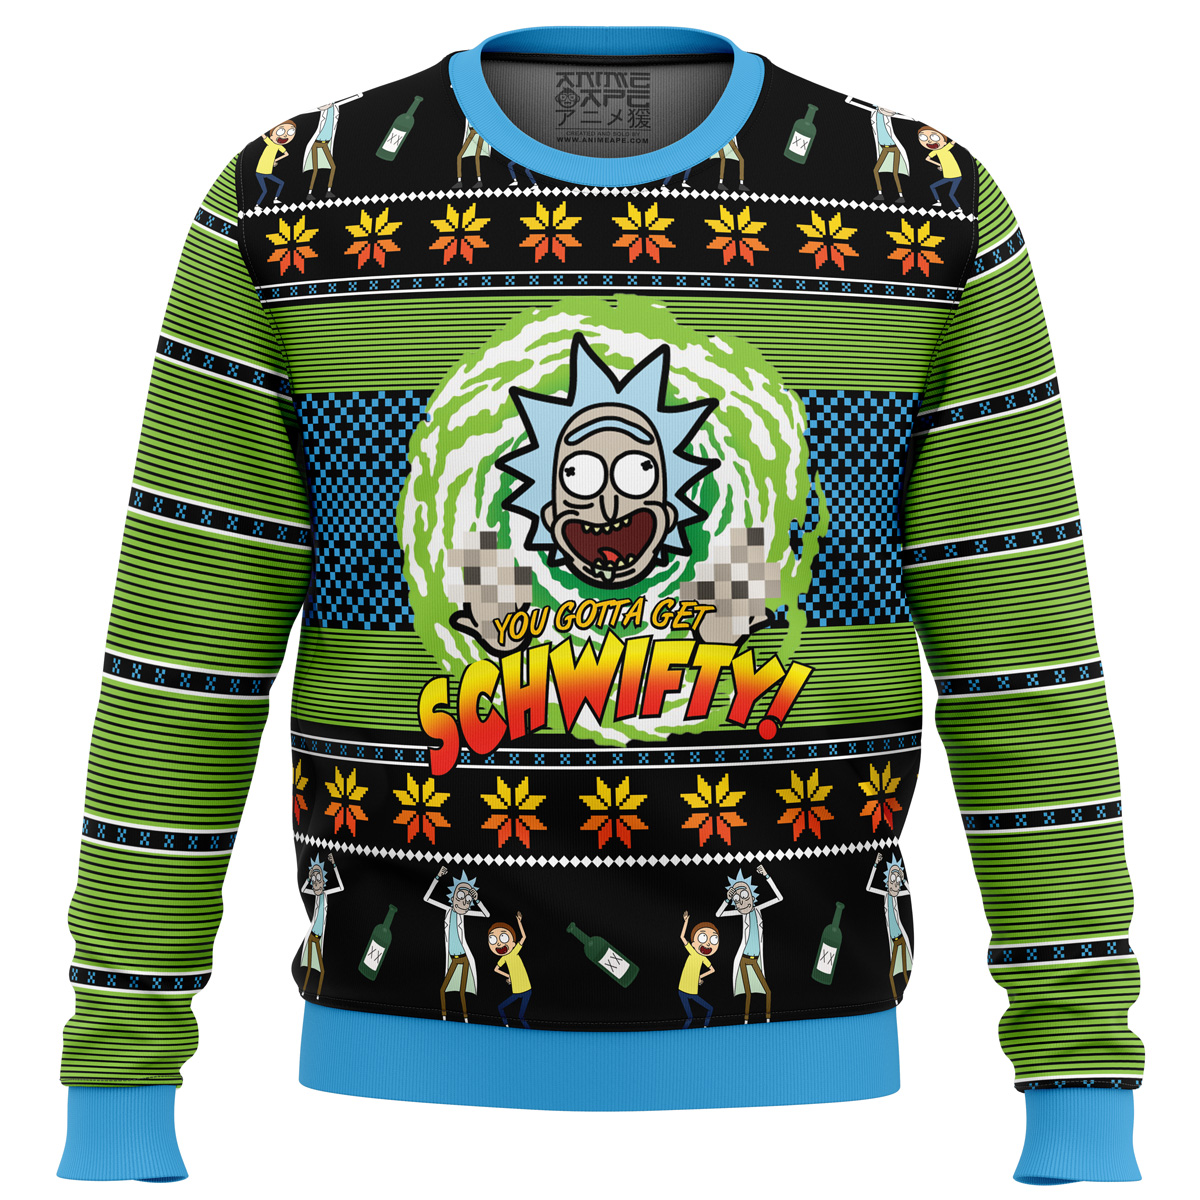 Let's Get Schwifty! Rick and Morty Ugly Christmas Sweater